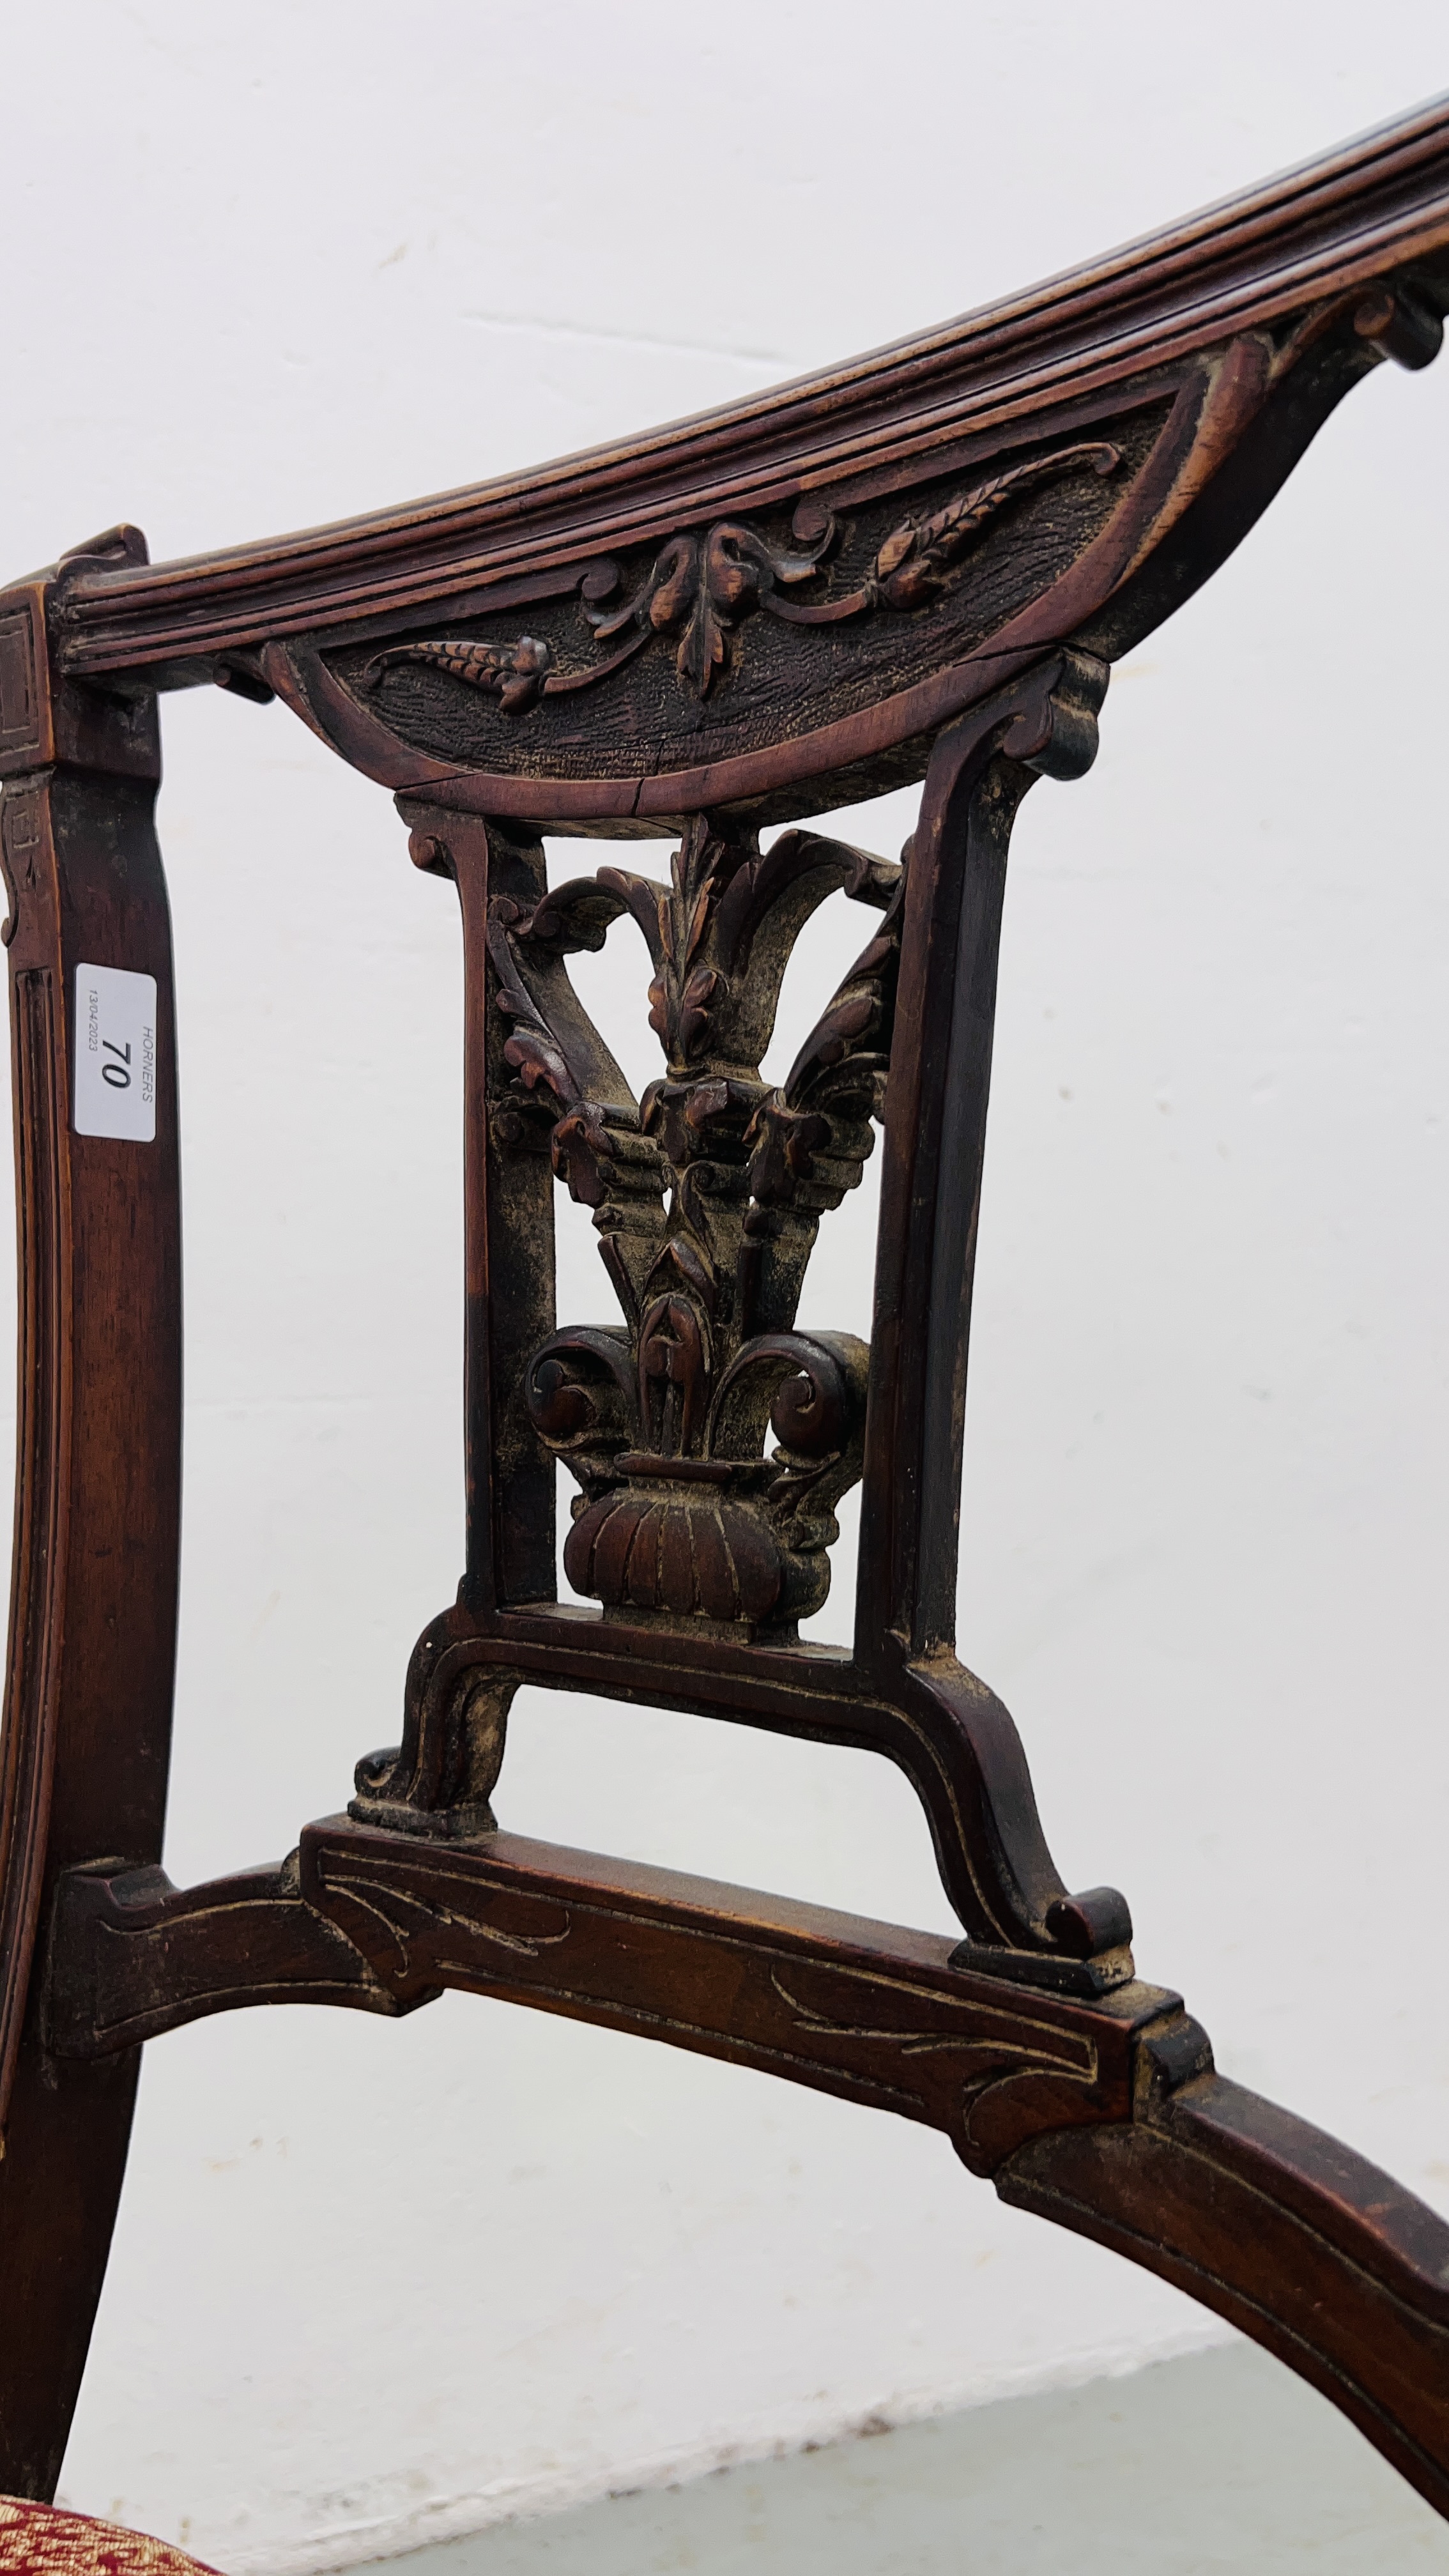 AN EDWARDIAN BEDROOM CHAIR WITH CARVED DETAILING AND UPHOLSTERED SEAT. - Image 5 of 6